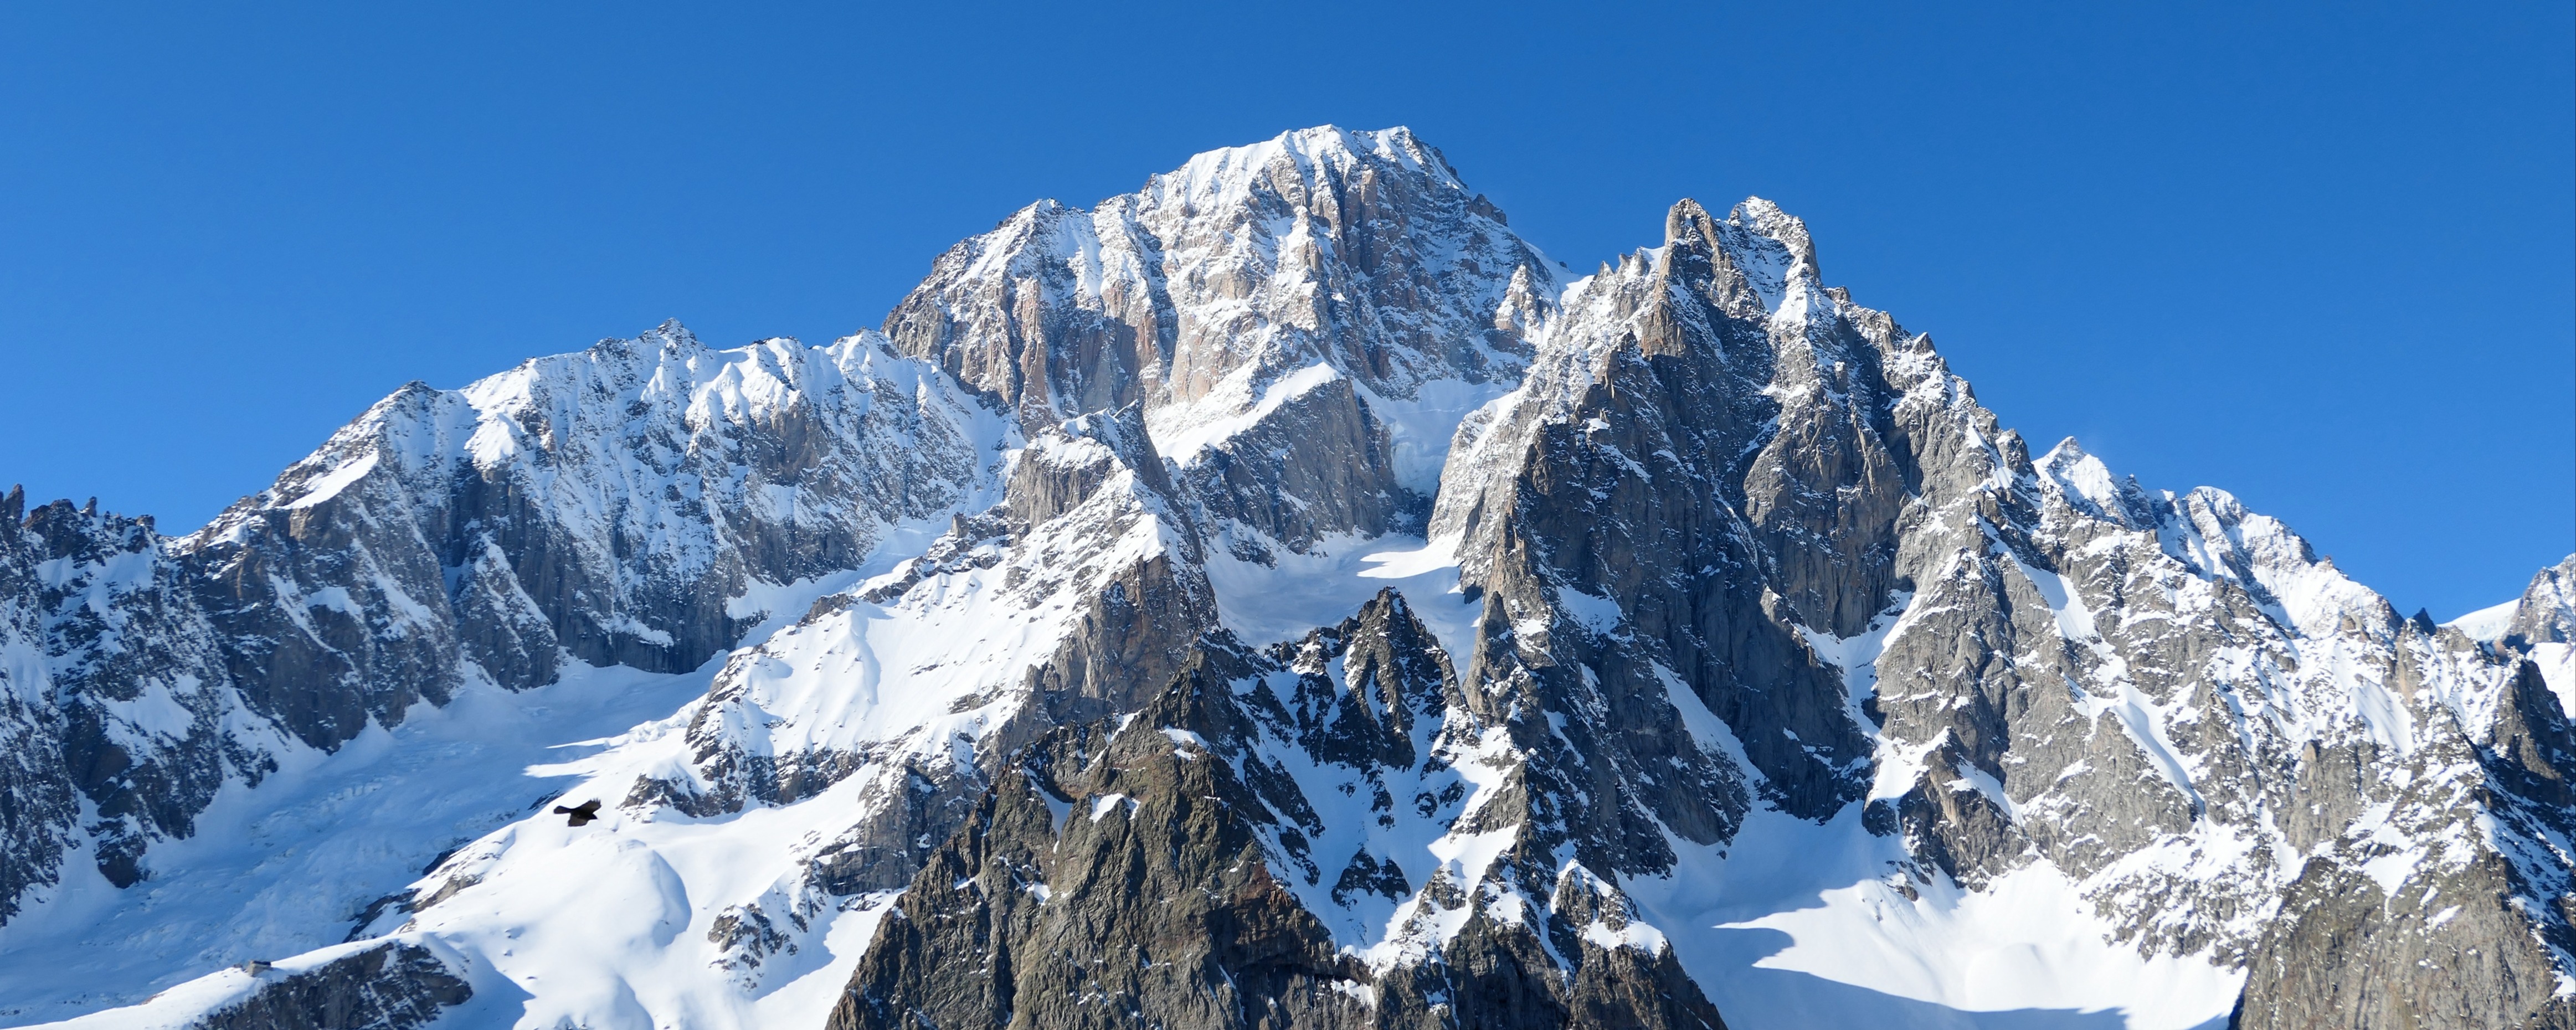 How to Climb Mont Blanc: The Tallest Peak in Western Europe